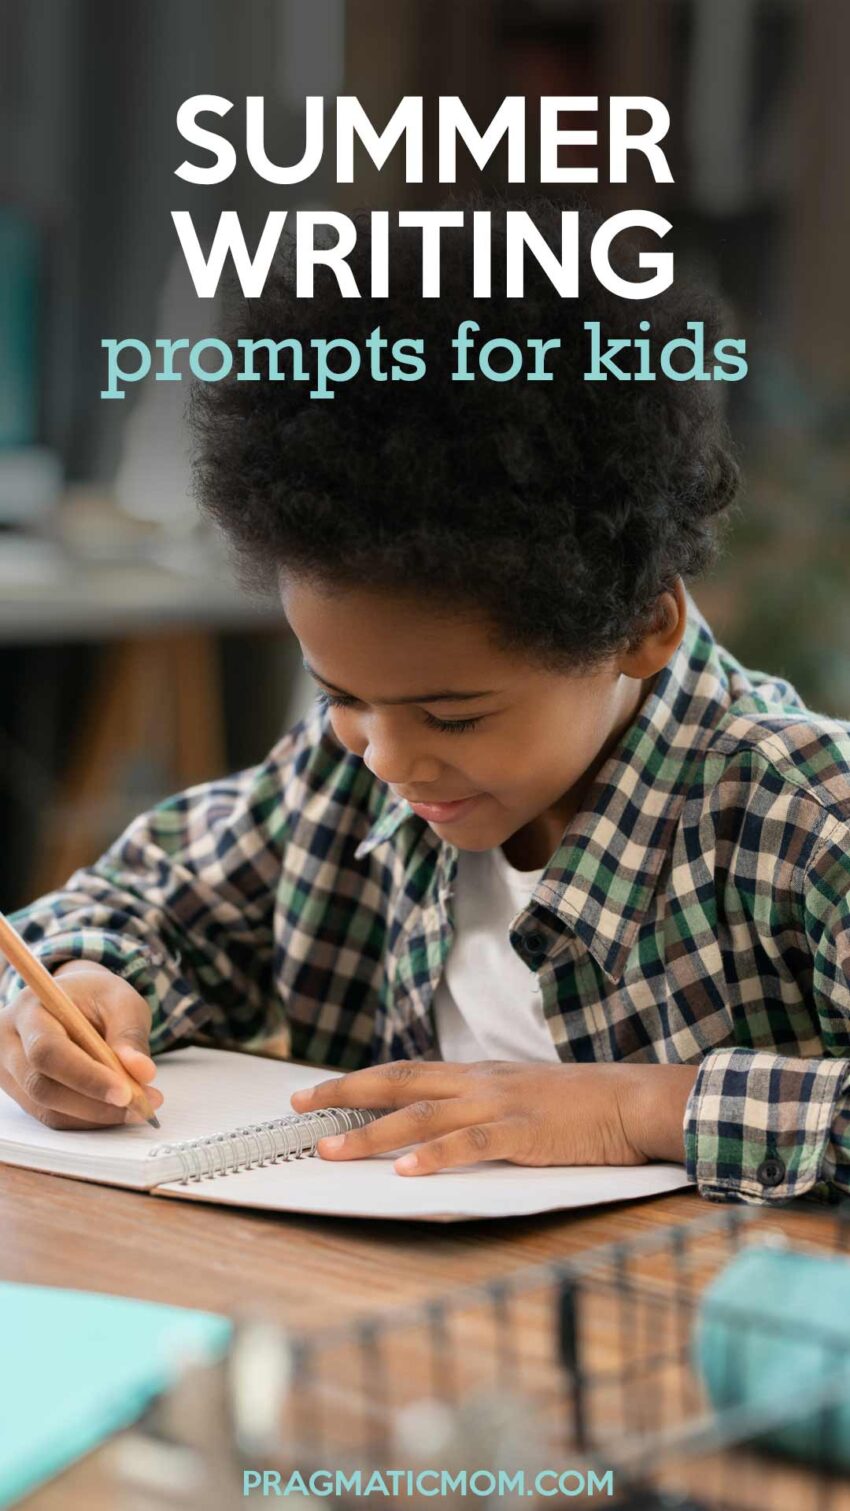 Summer Writing Prompts for Kids